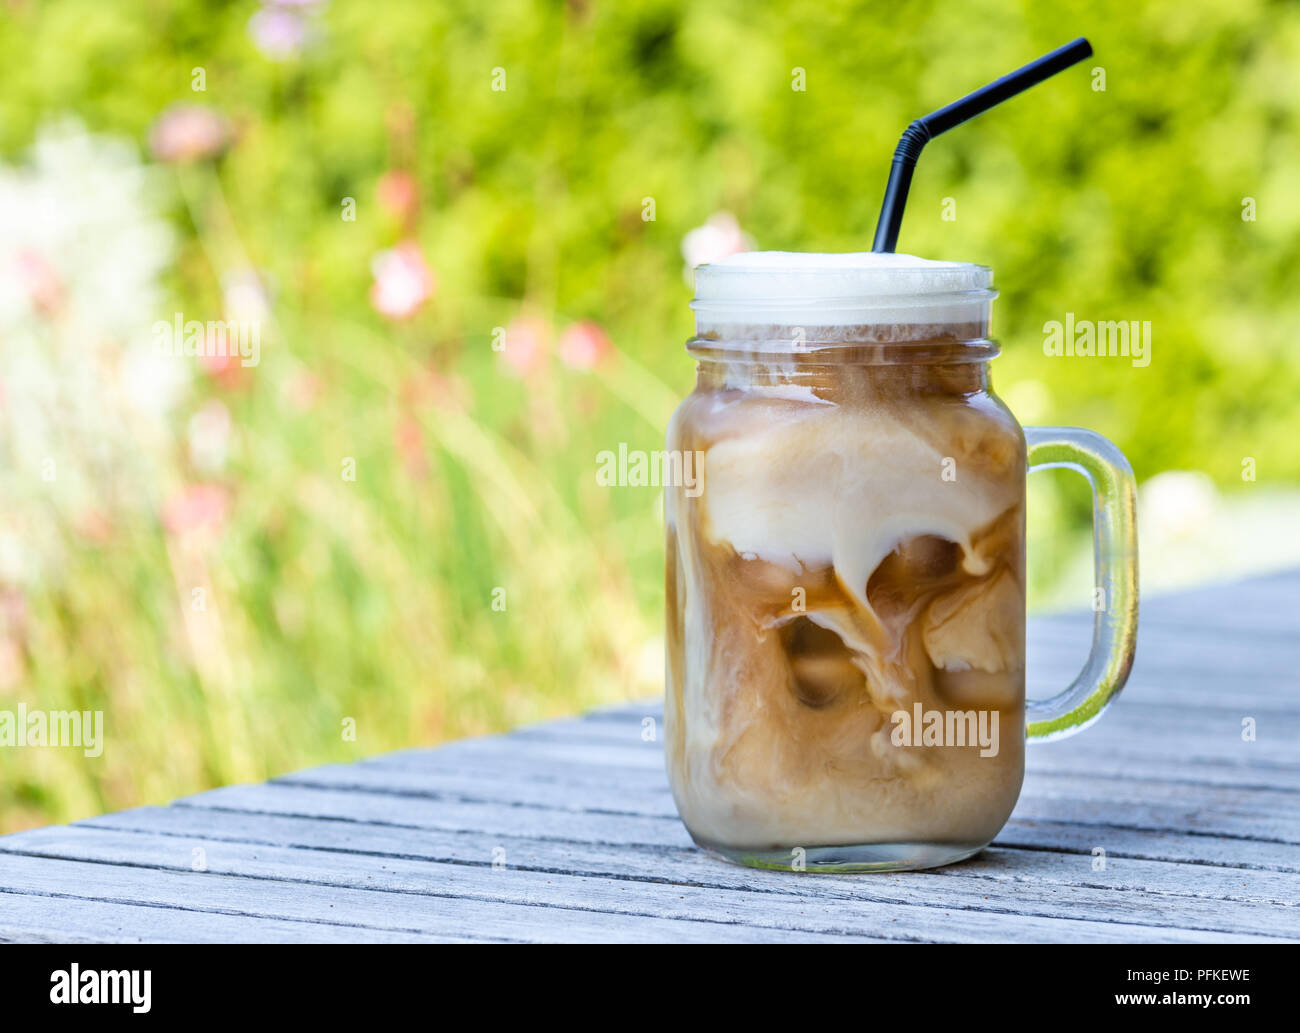 https://c8.alamy.com/comp/PFKEWE/ice-coffee-in-glass-mug-with-milk-and-cinnamon-on-wooden-table-in-the-garden-PFKEWE.jpg